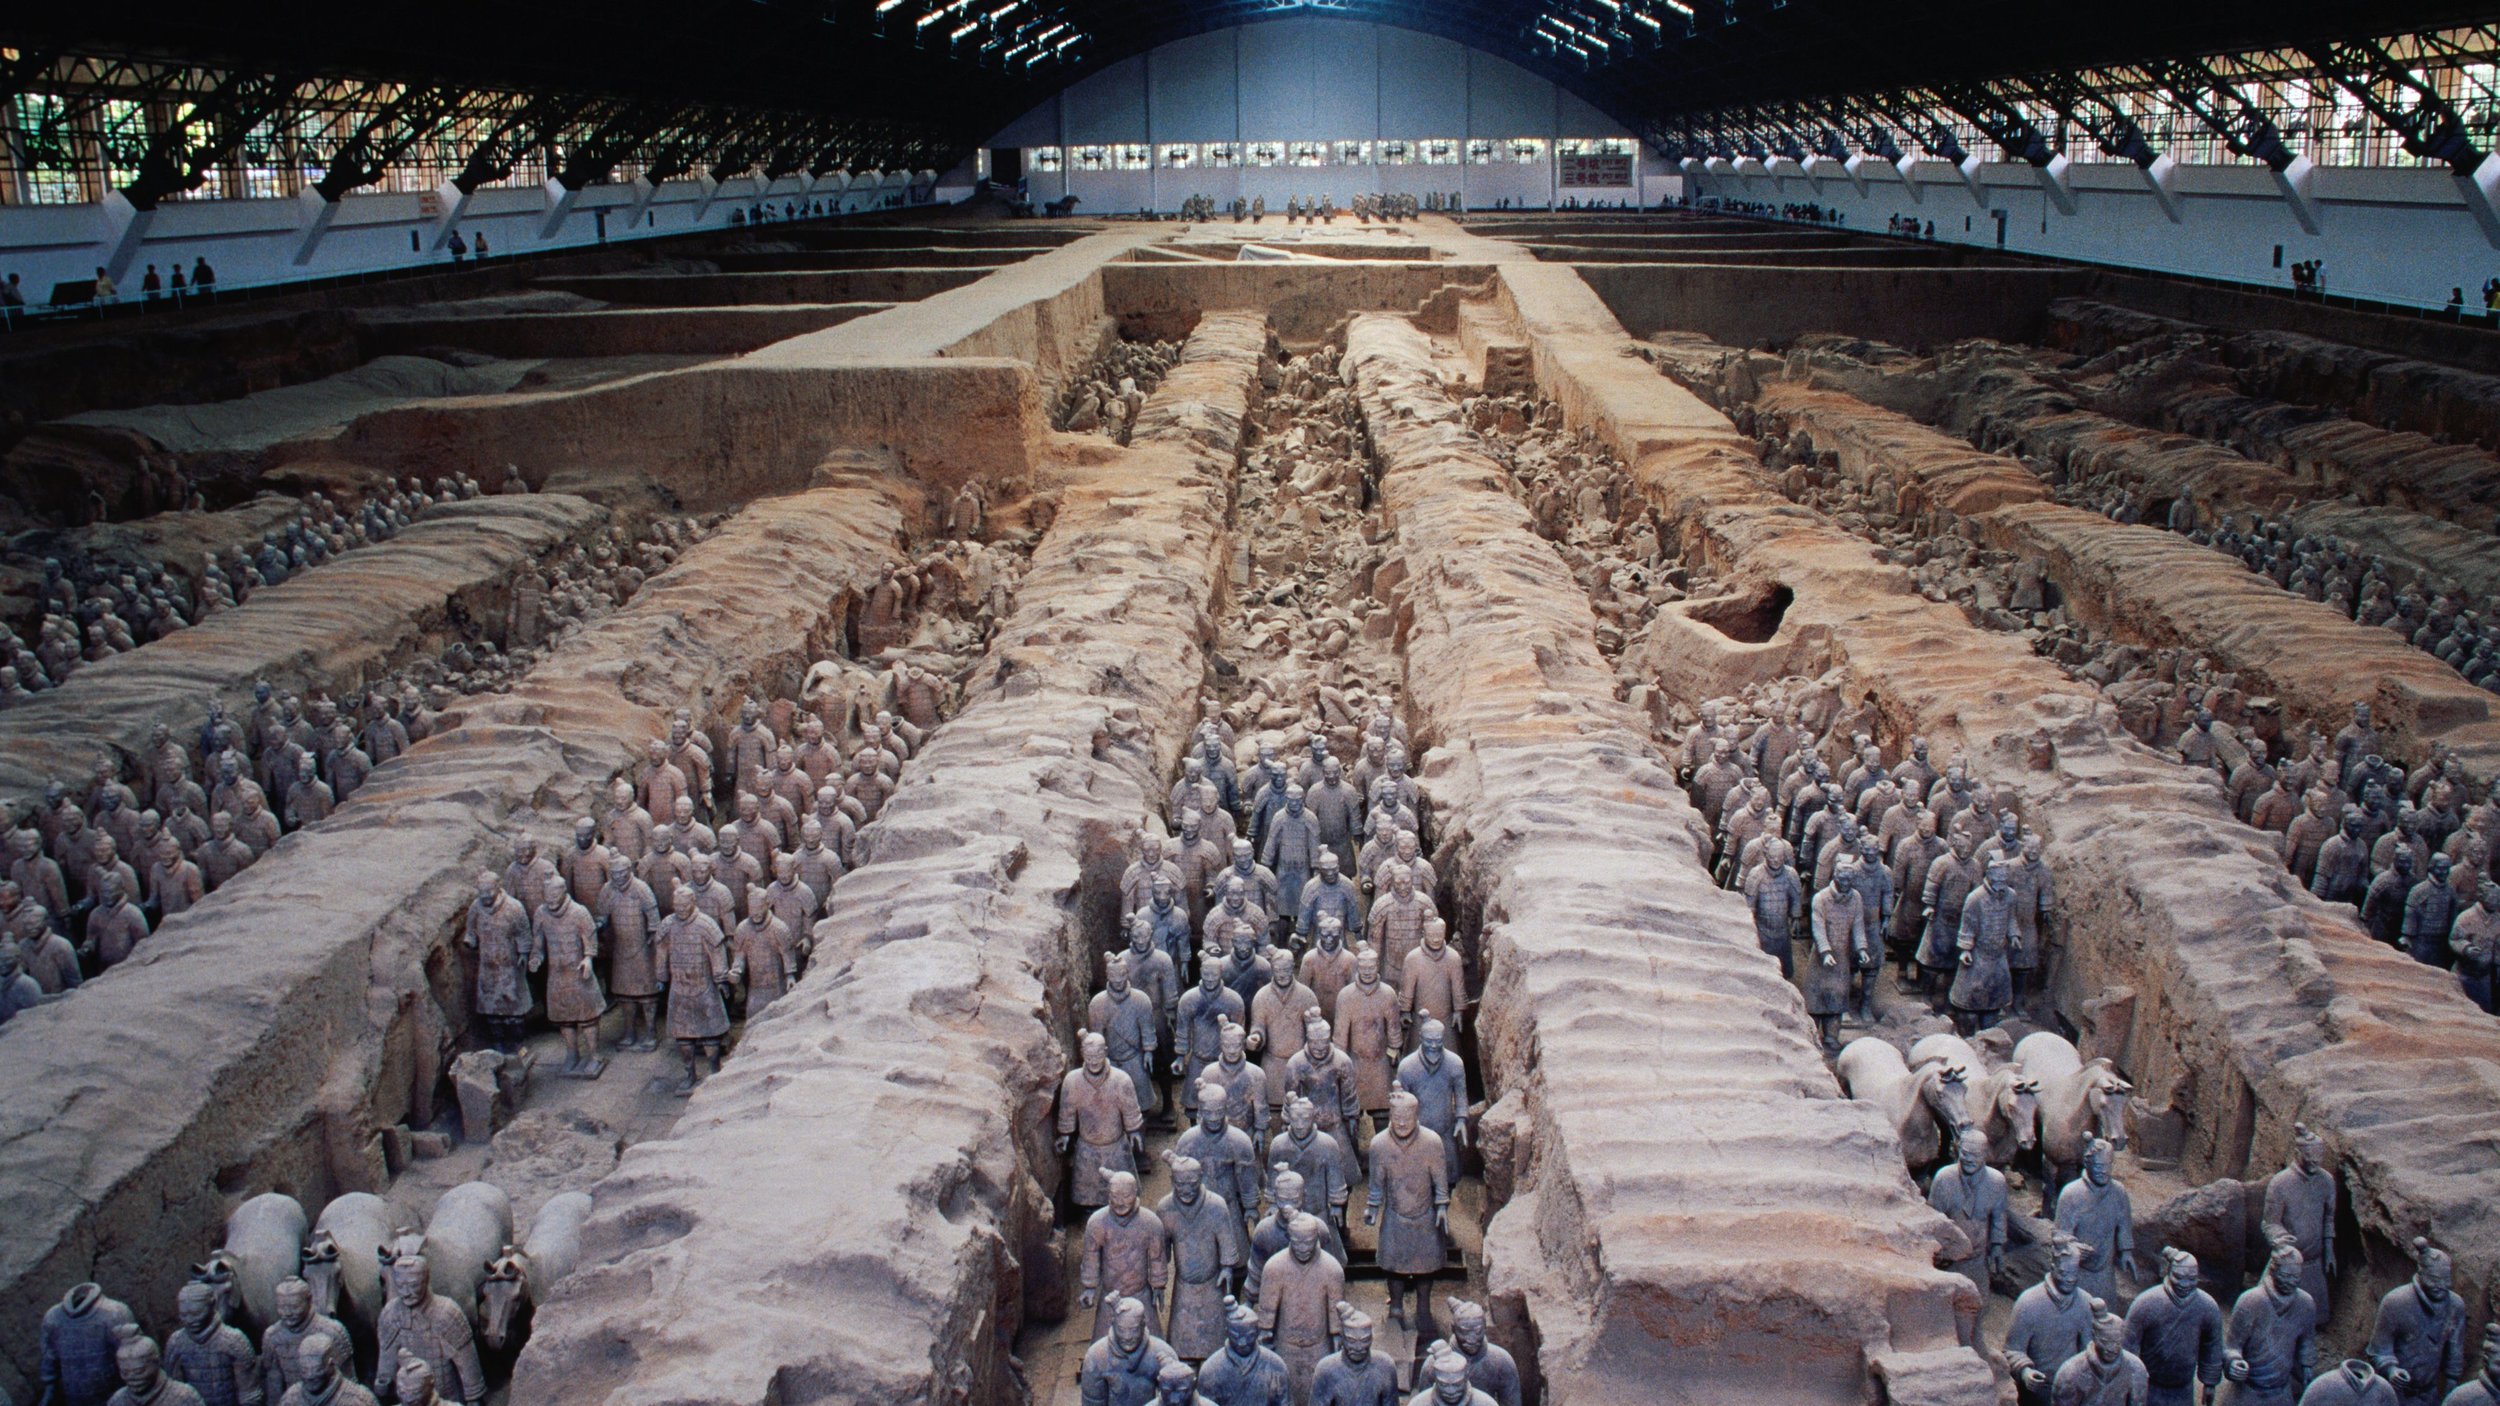 famous-2000-year-old-army-of-terracotta-warriors-bingmayong-discovered-in-1974-148548755-575c0ef35f9b58f22ead6418.jpg